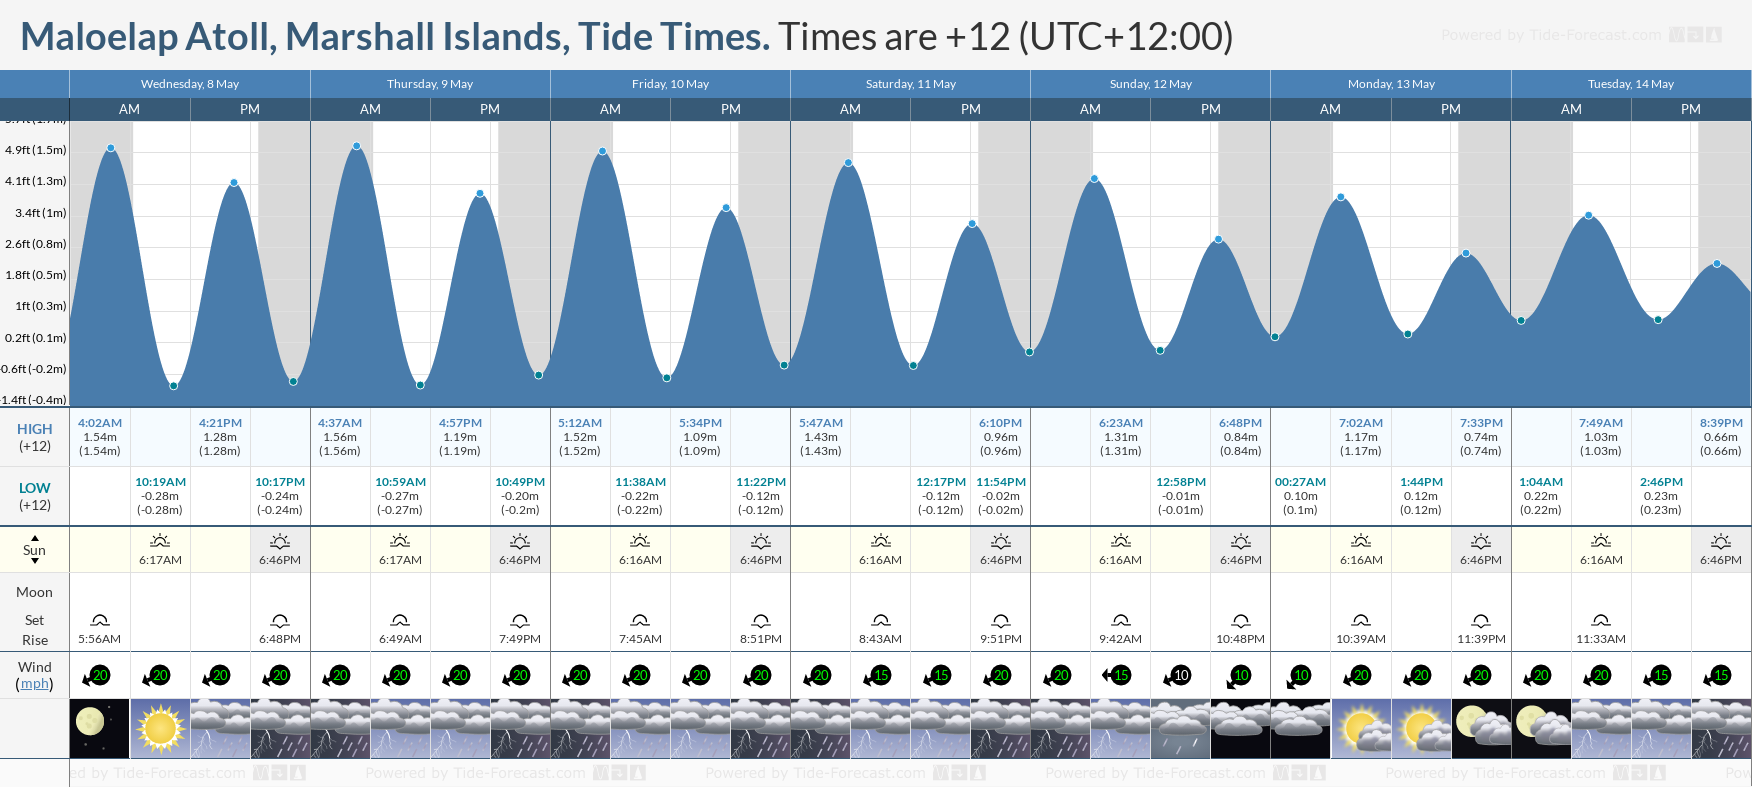 Maloelap Atoll, Marshall Islands Tide Chart including high and low tide tide times for the next 7 days